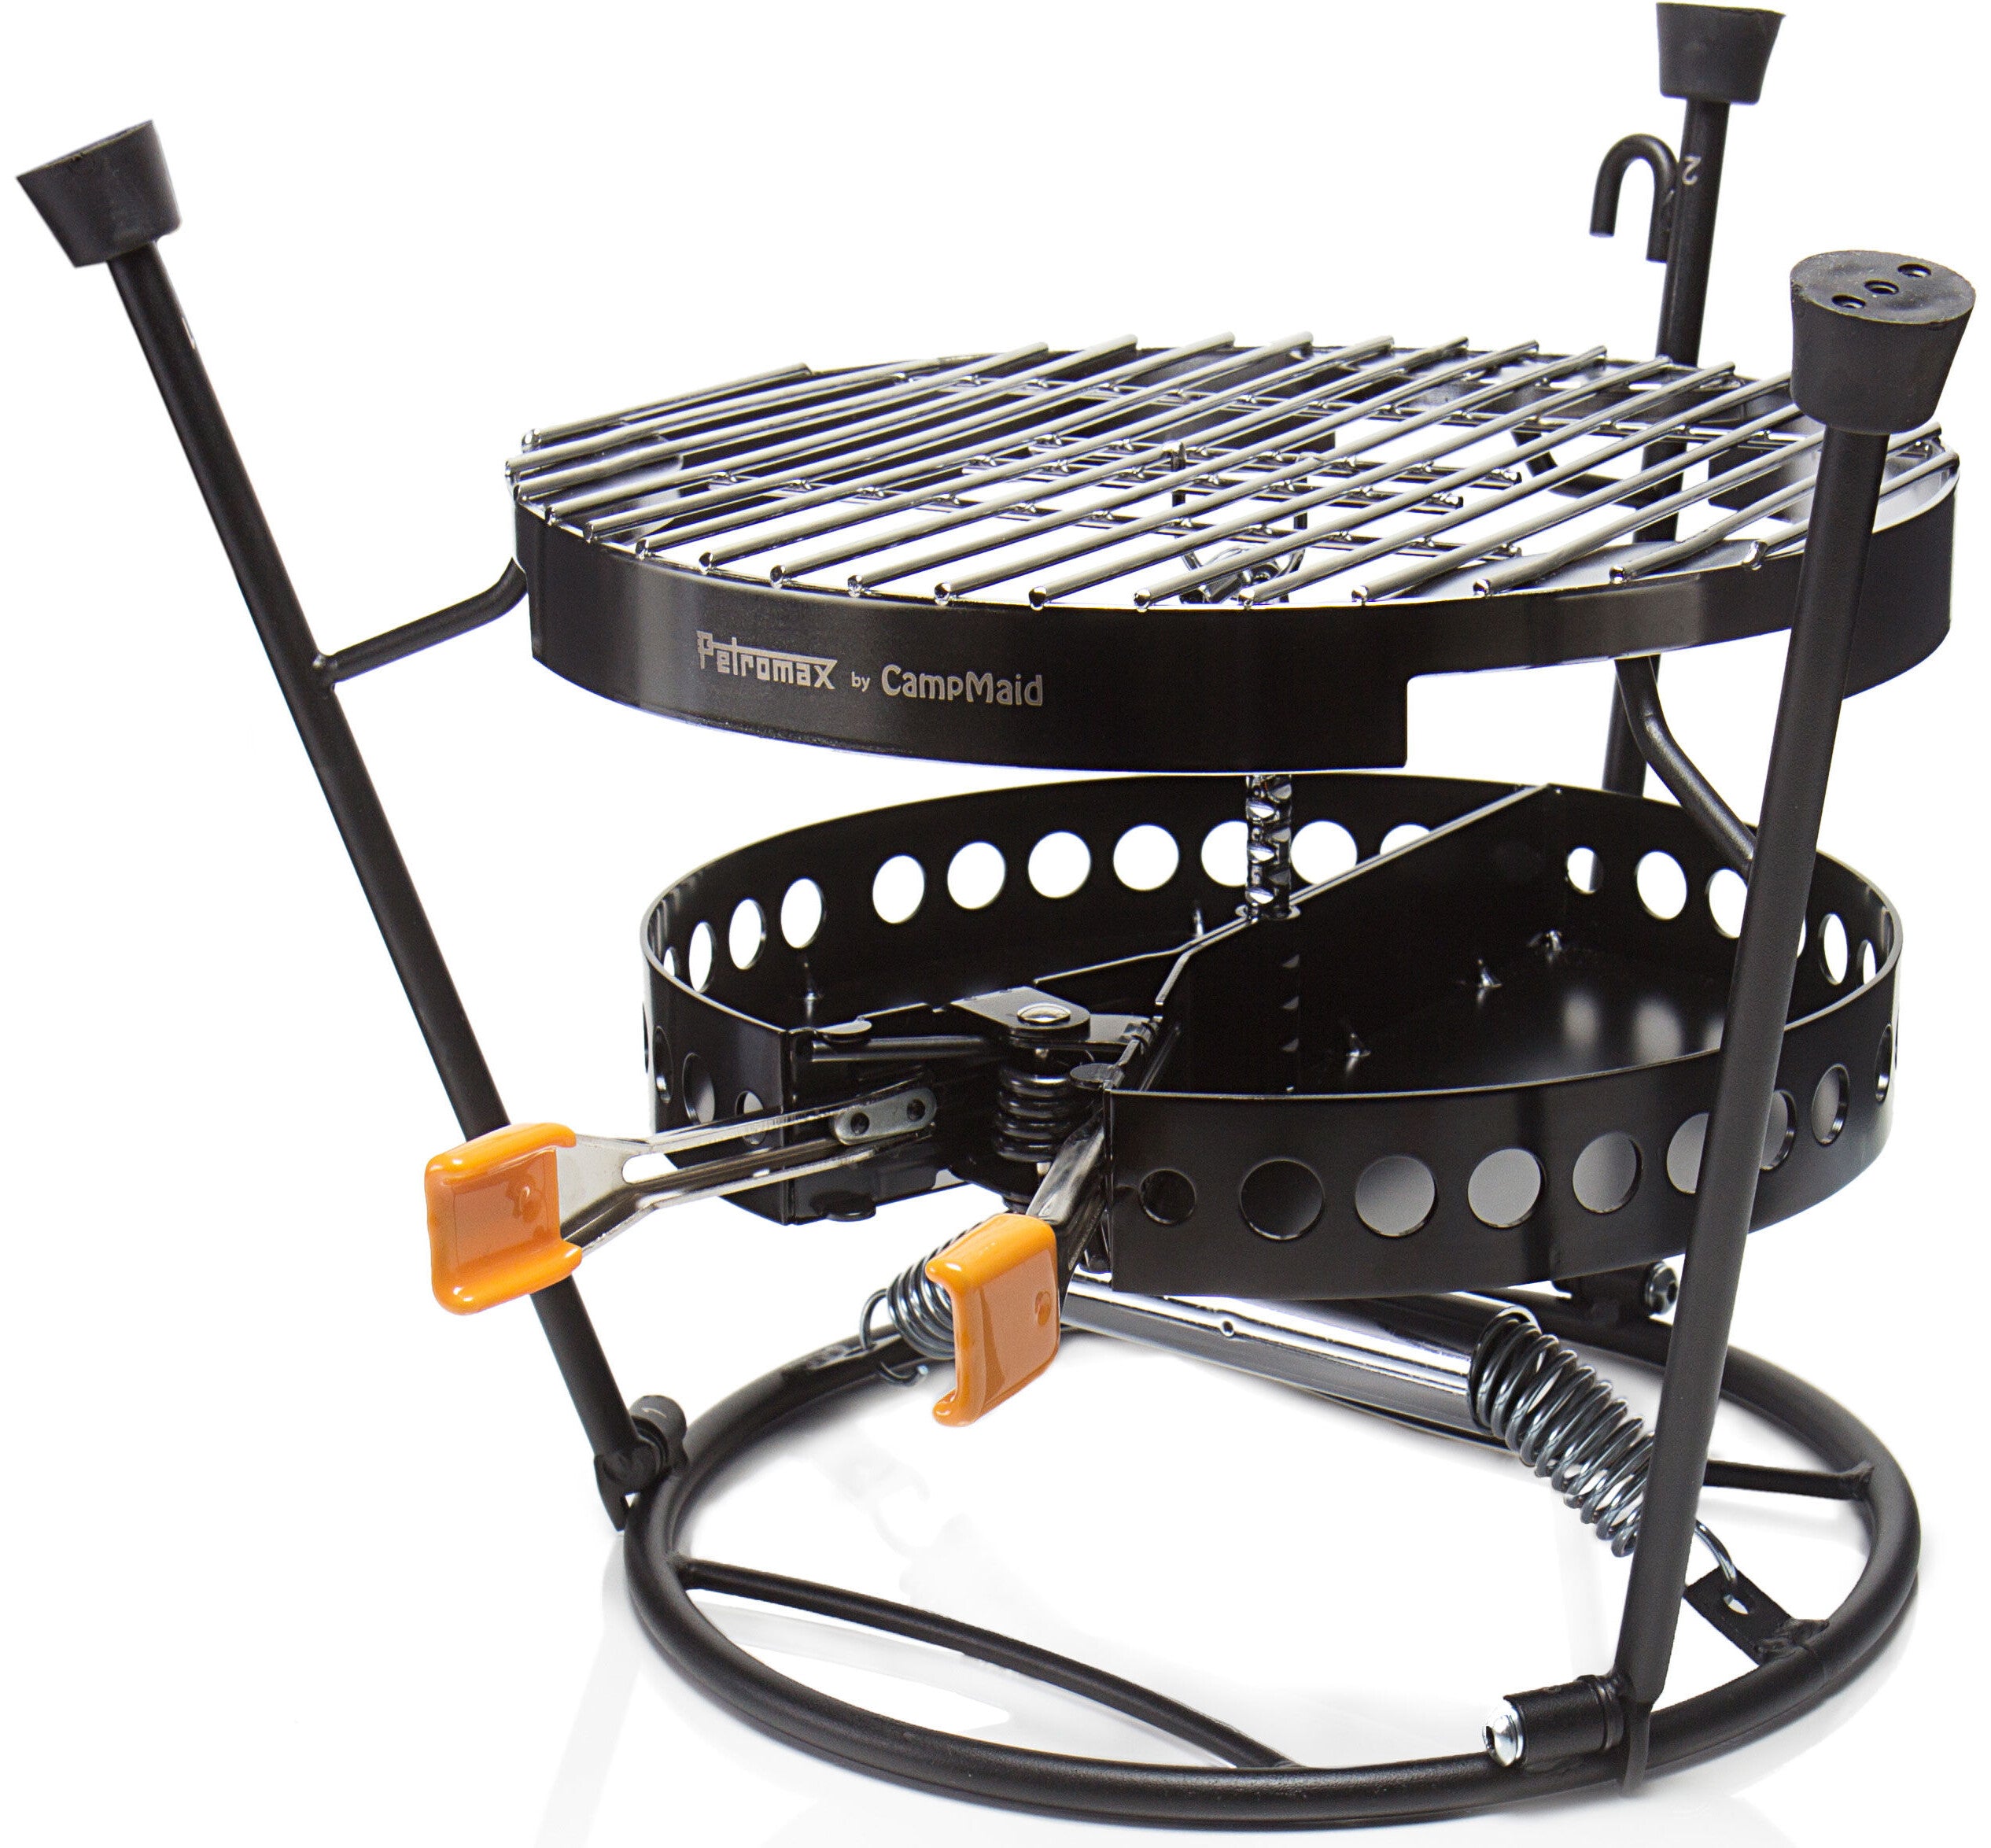 Petromax Grill rooster pro-ft Vuurbak. 